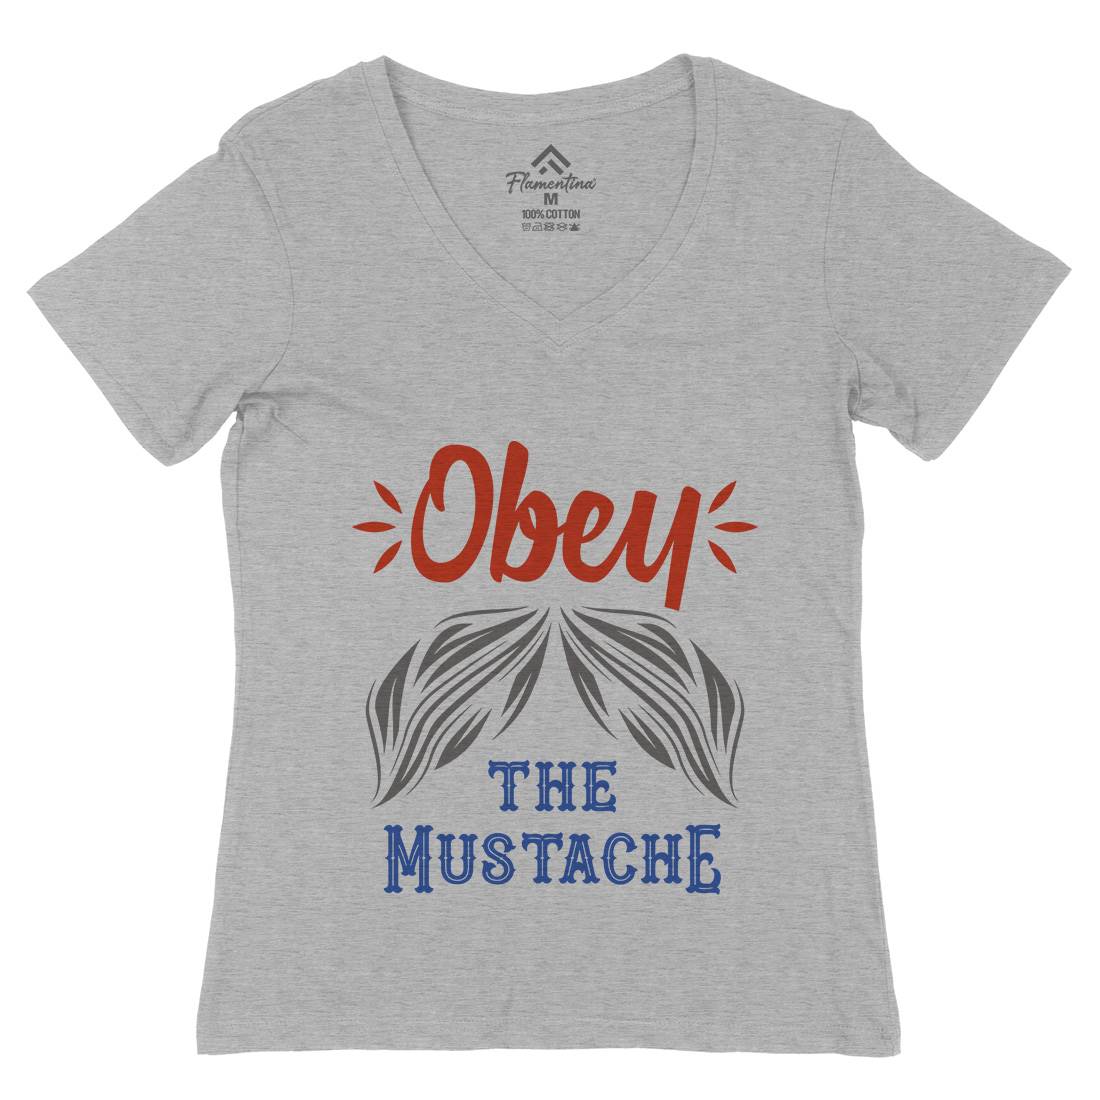 Obey The Moustache Womens Organic V-Neck T-Shirt Barber C802